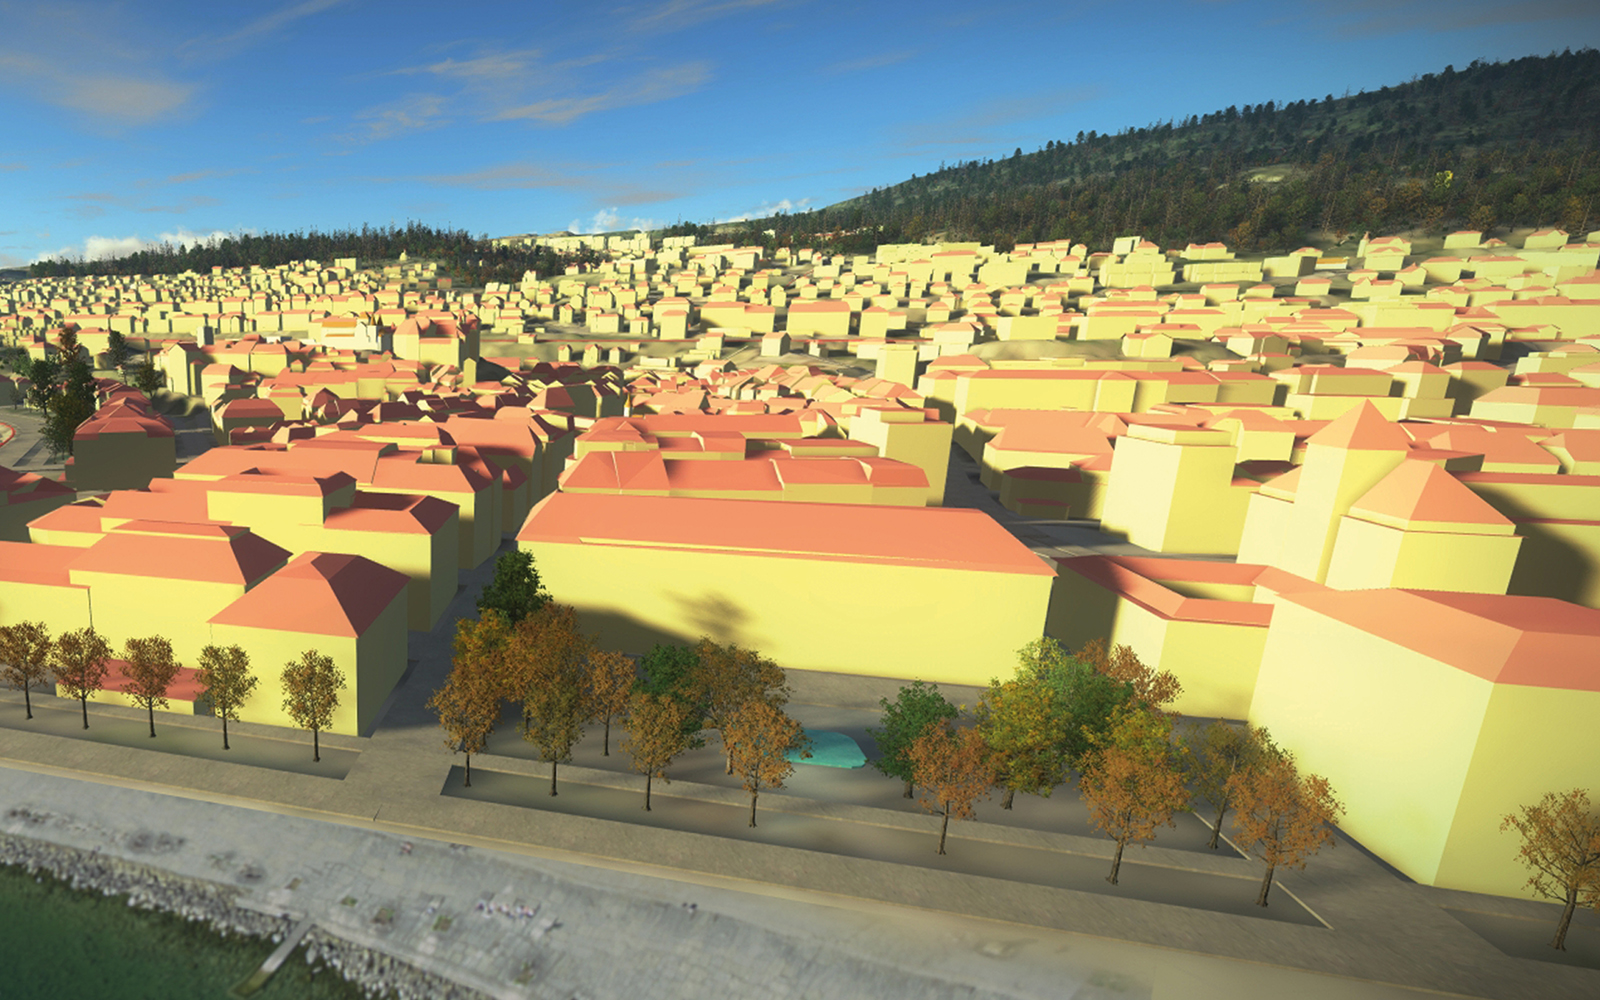 The picture shows 3D building models of Neuchâtel from a bird's eye view, looking northwards from Lake Neuchâtel.